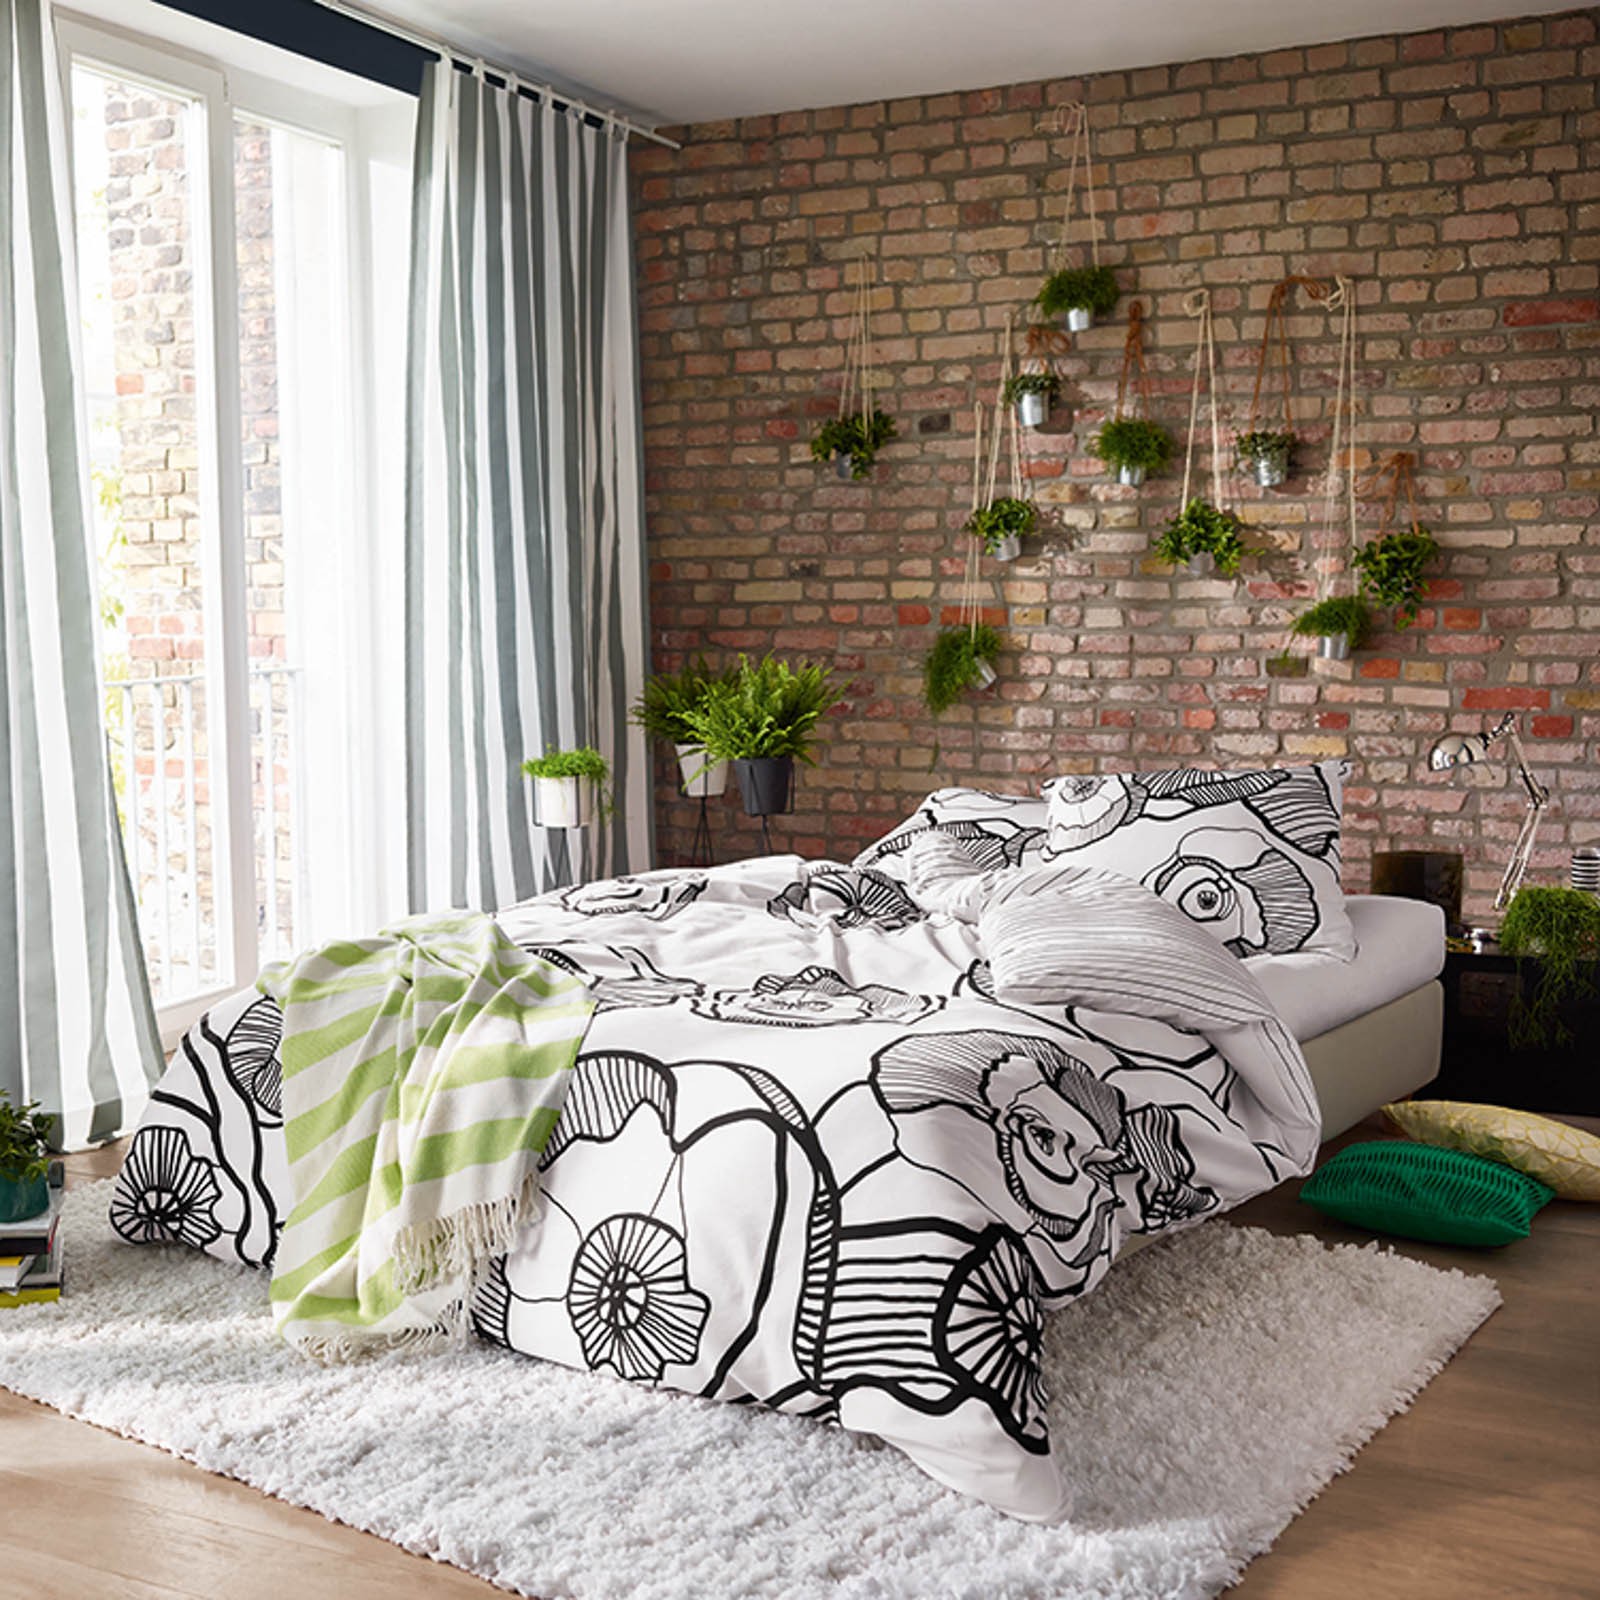 beddroom with bed near window with exposed brick wall